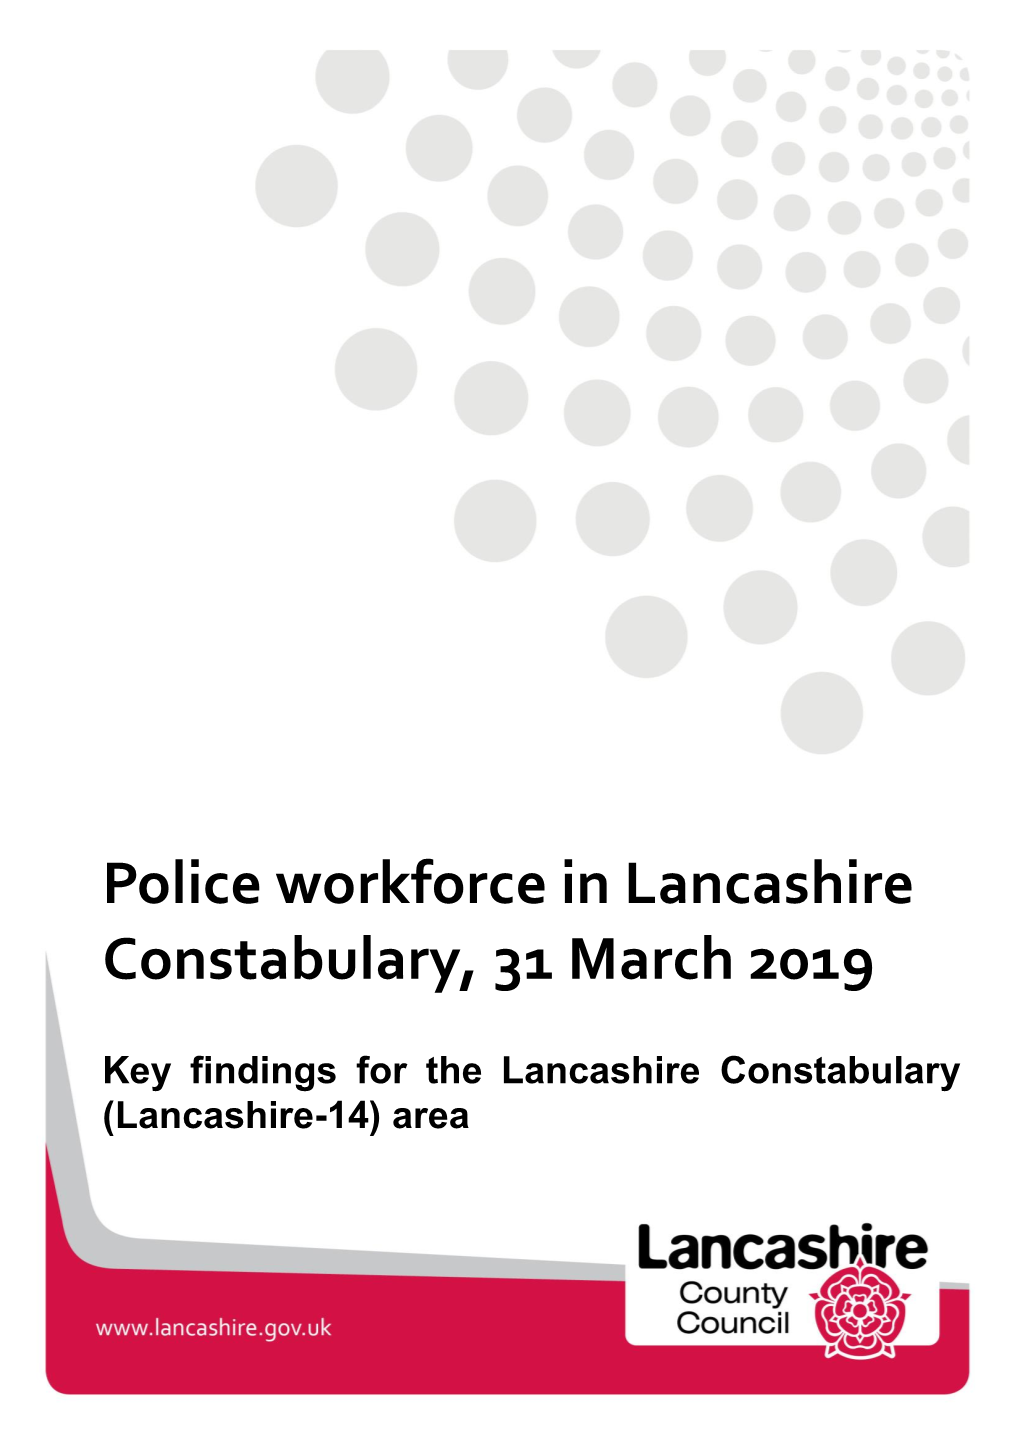 Police Workforce in Lancashire Constabulary, 31 March 2019